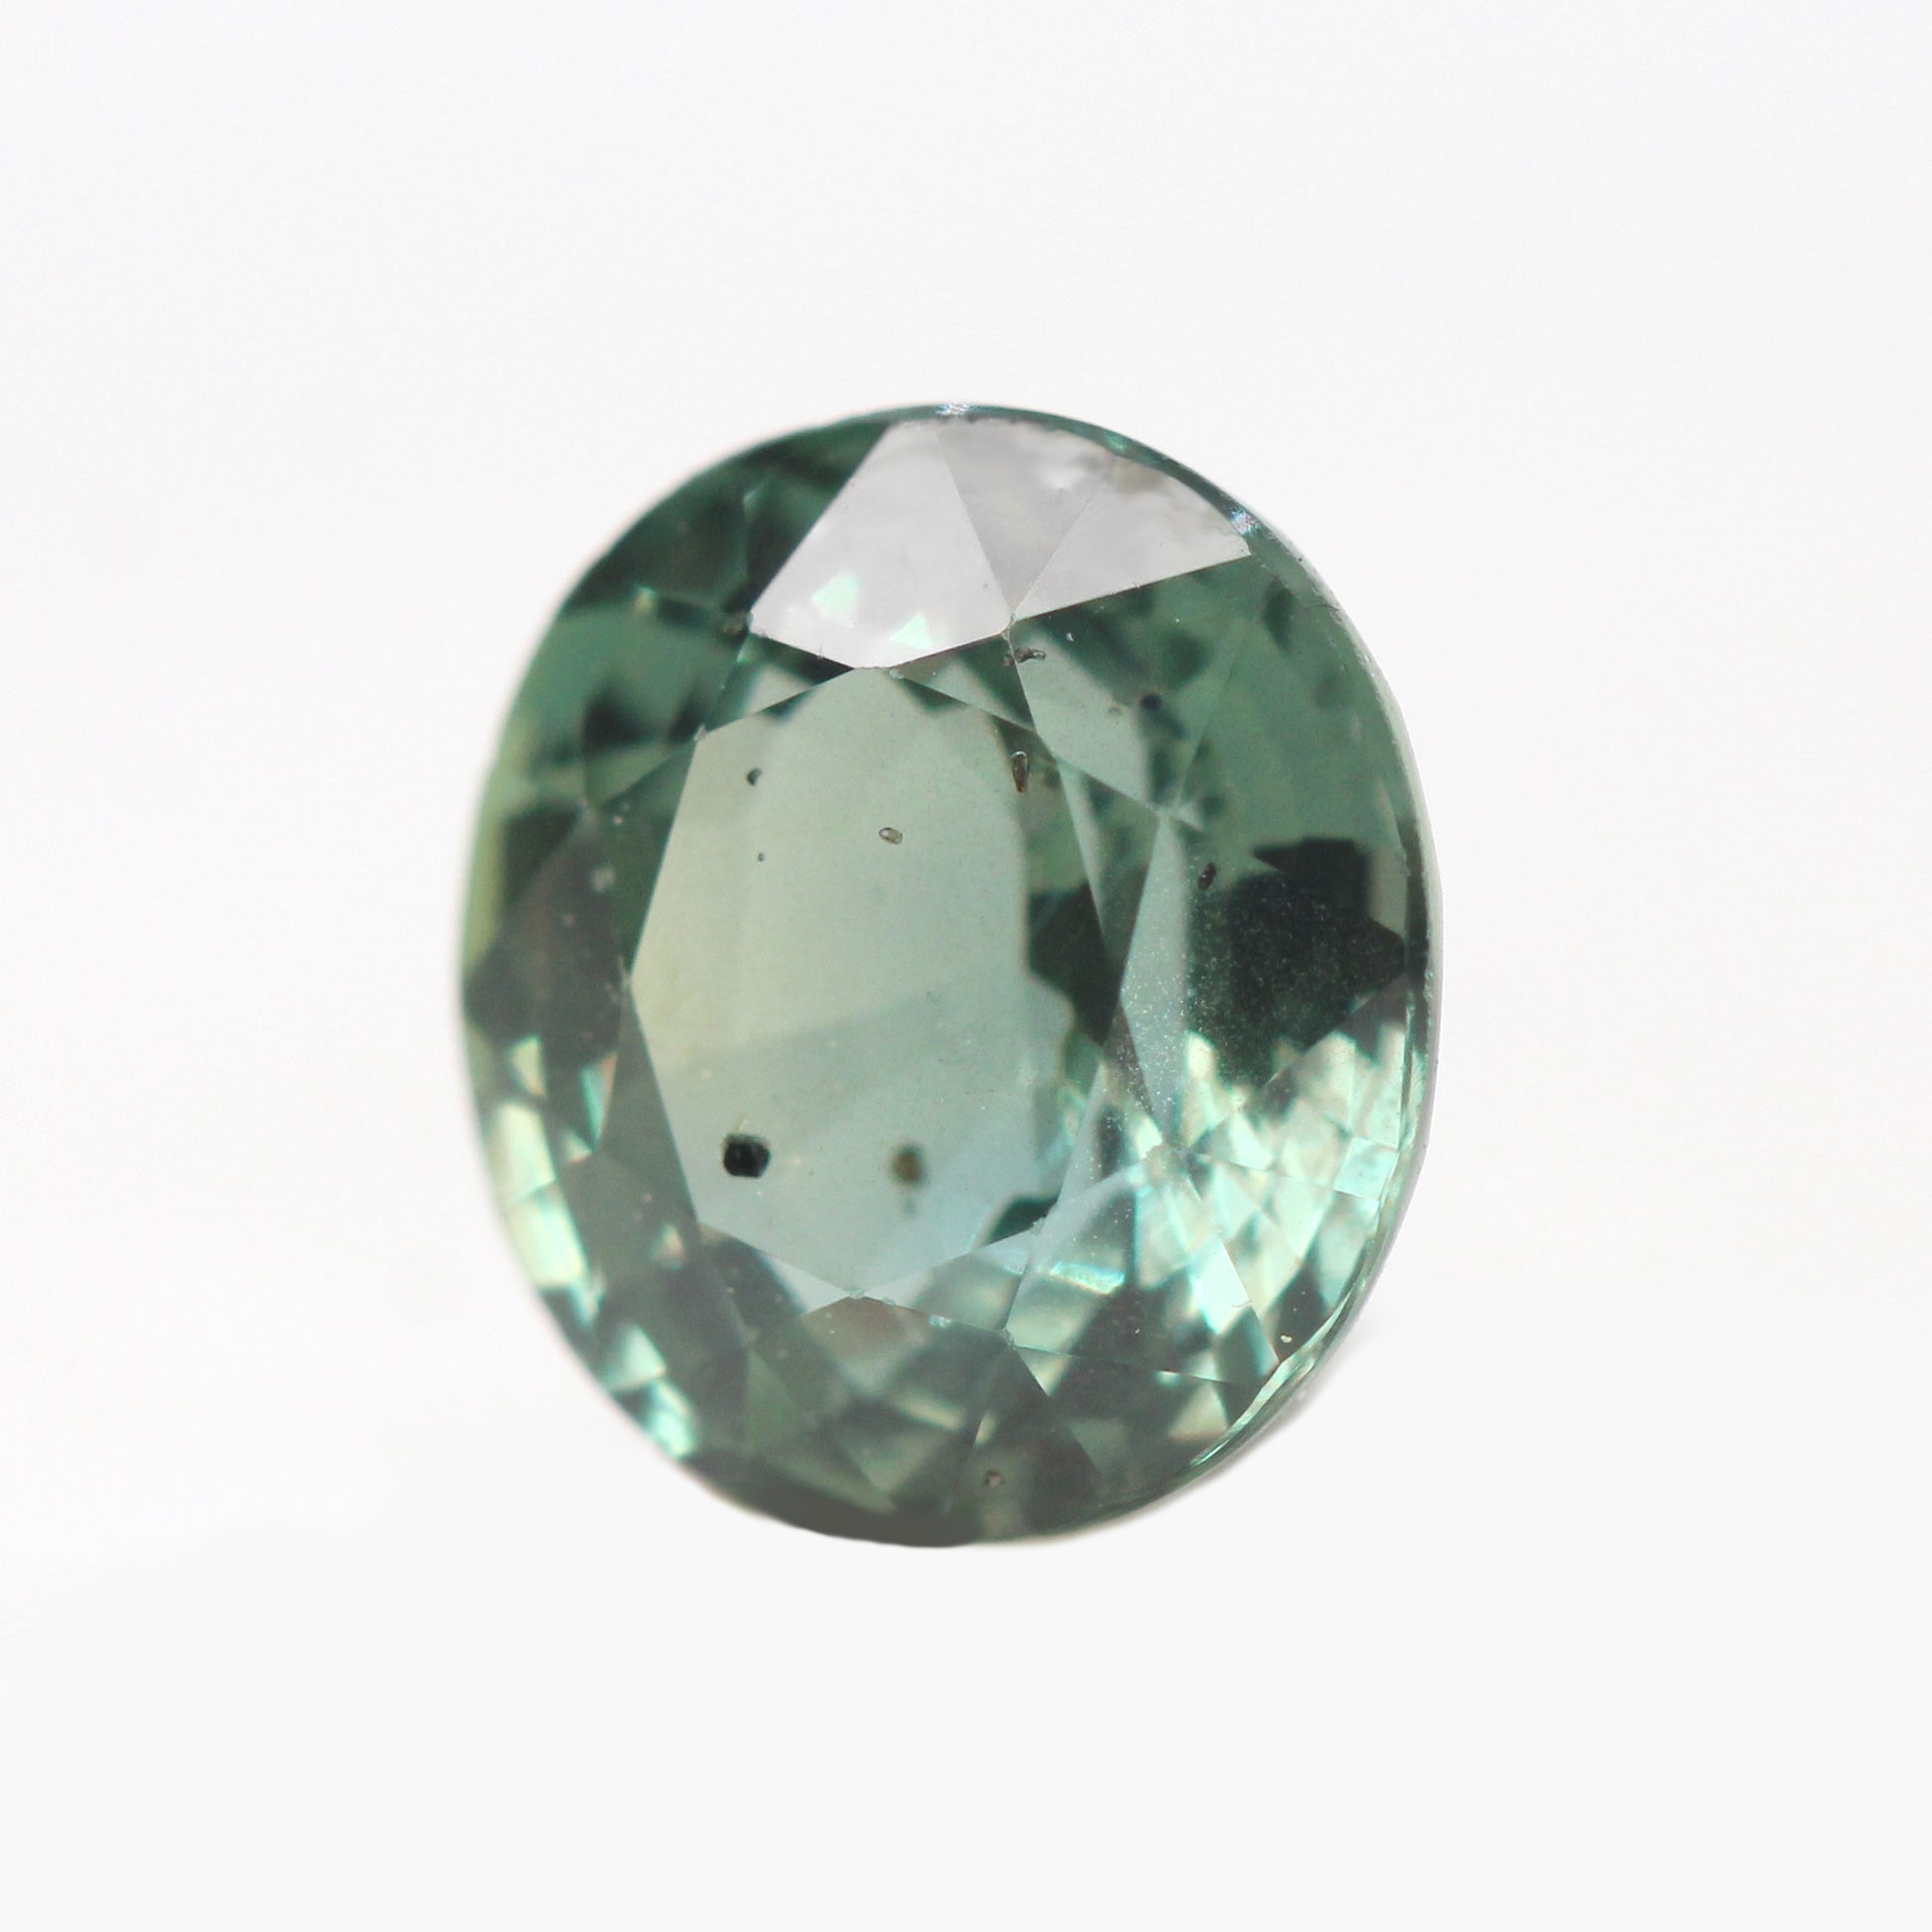 1.49 Carat Light Green Teal Sapphire for Custom Work - Inventory Code GTOS149 - Midwinter Co. Alternative Bridal Rings and Modern Fine Jewelry